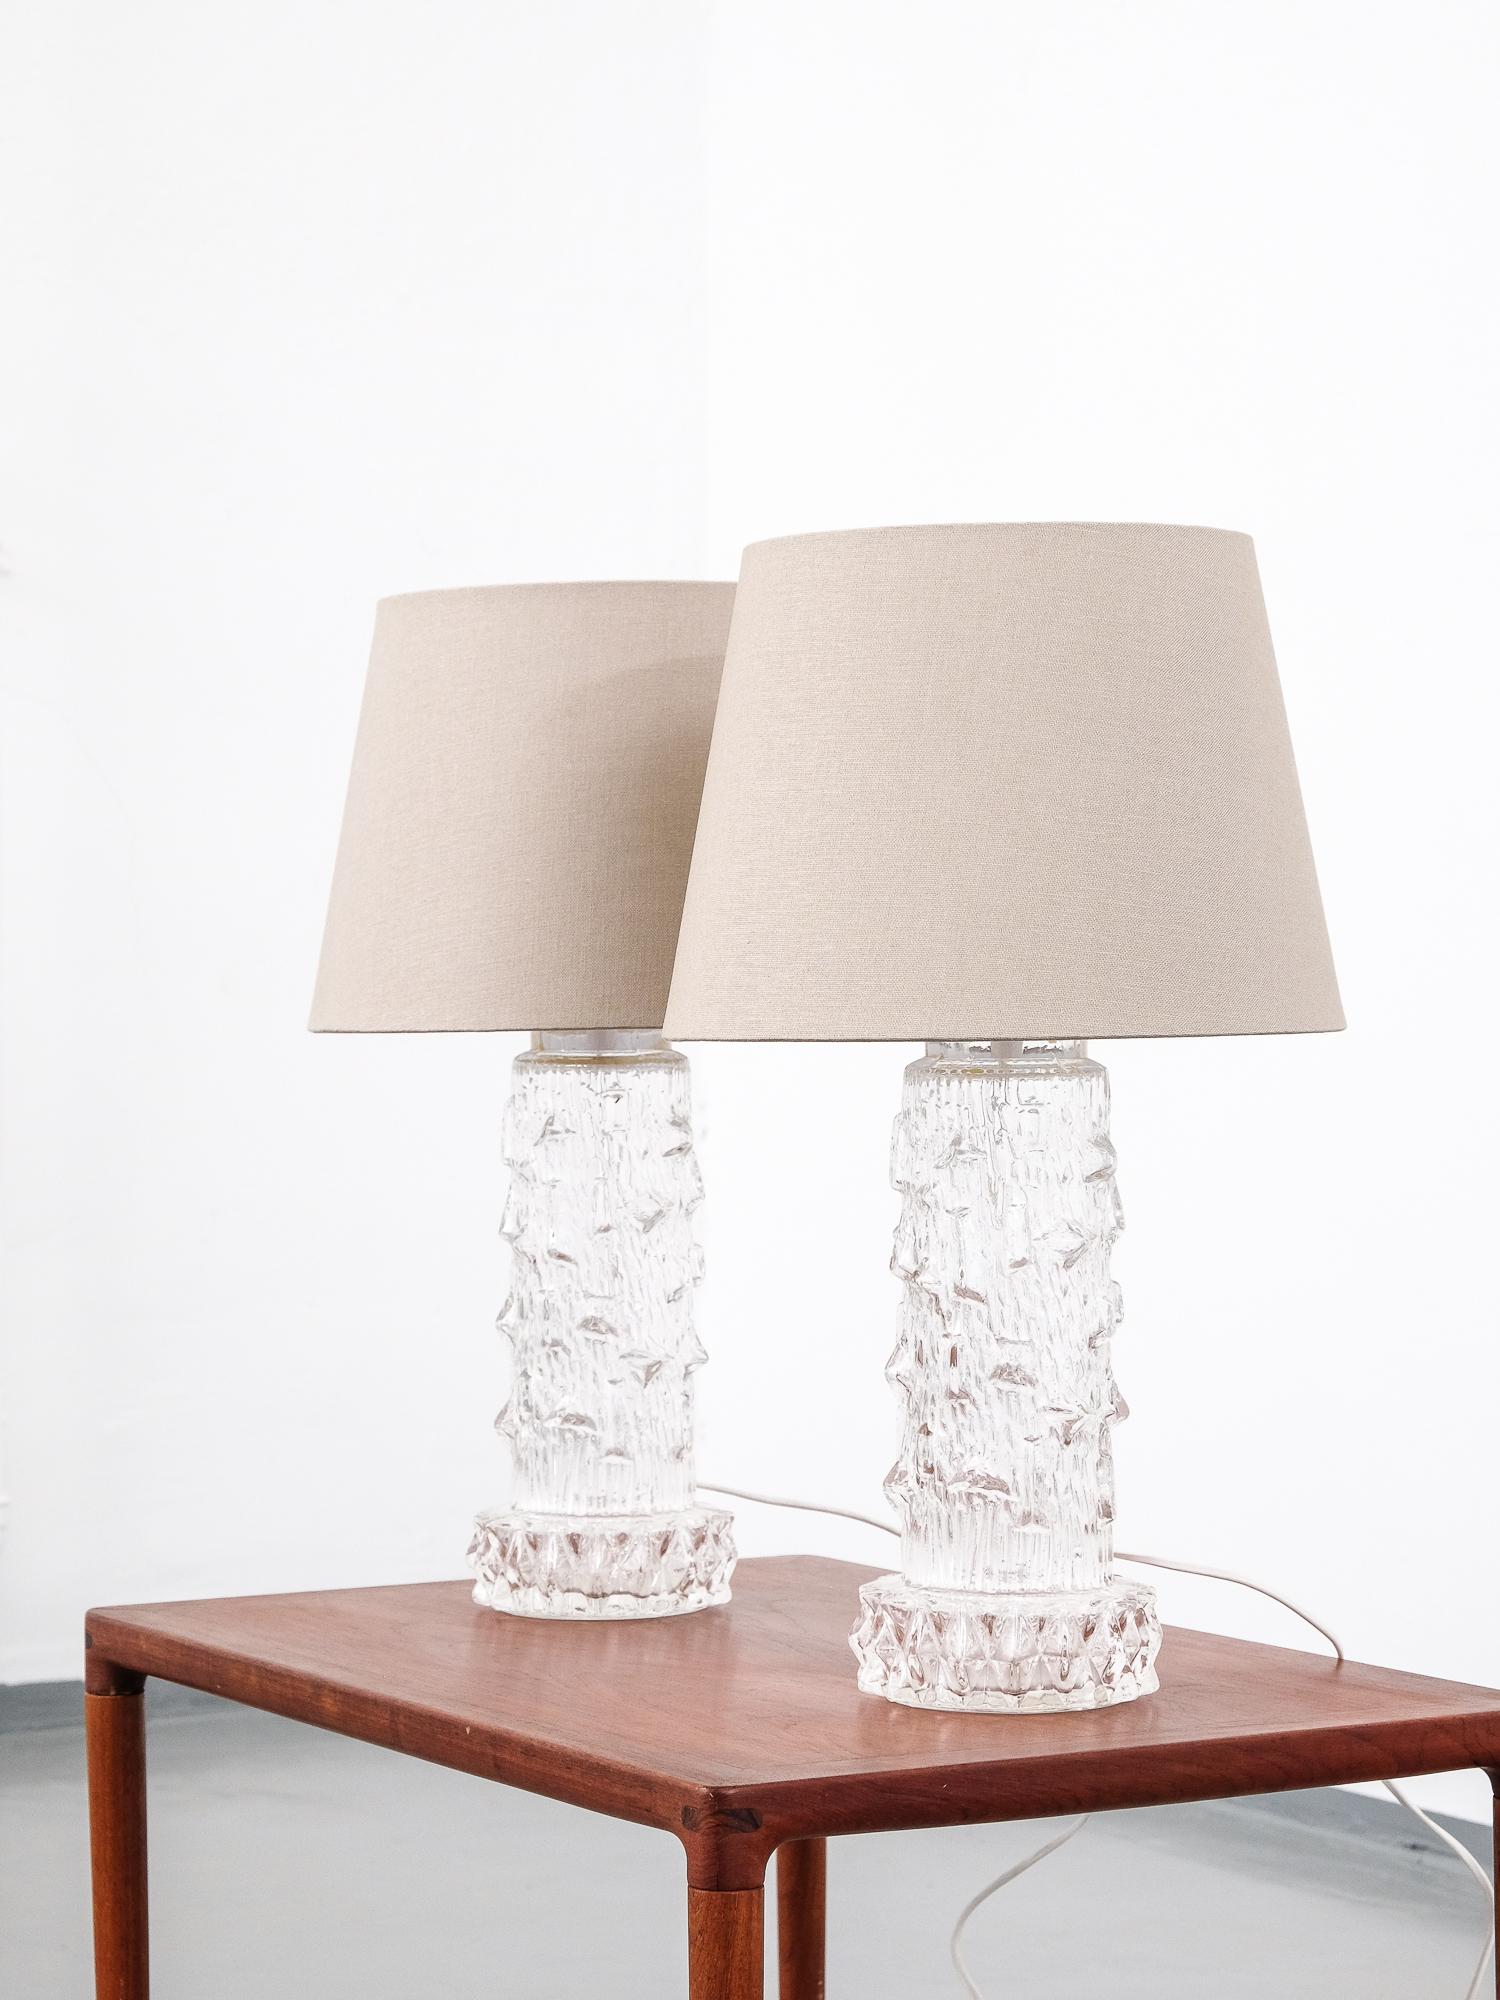 Great pair of midcentury Scandinavian table lamps. The clear glass leg has ice-like pattern. Unknown designer.

Measures: Height with shade 55 cm.